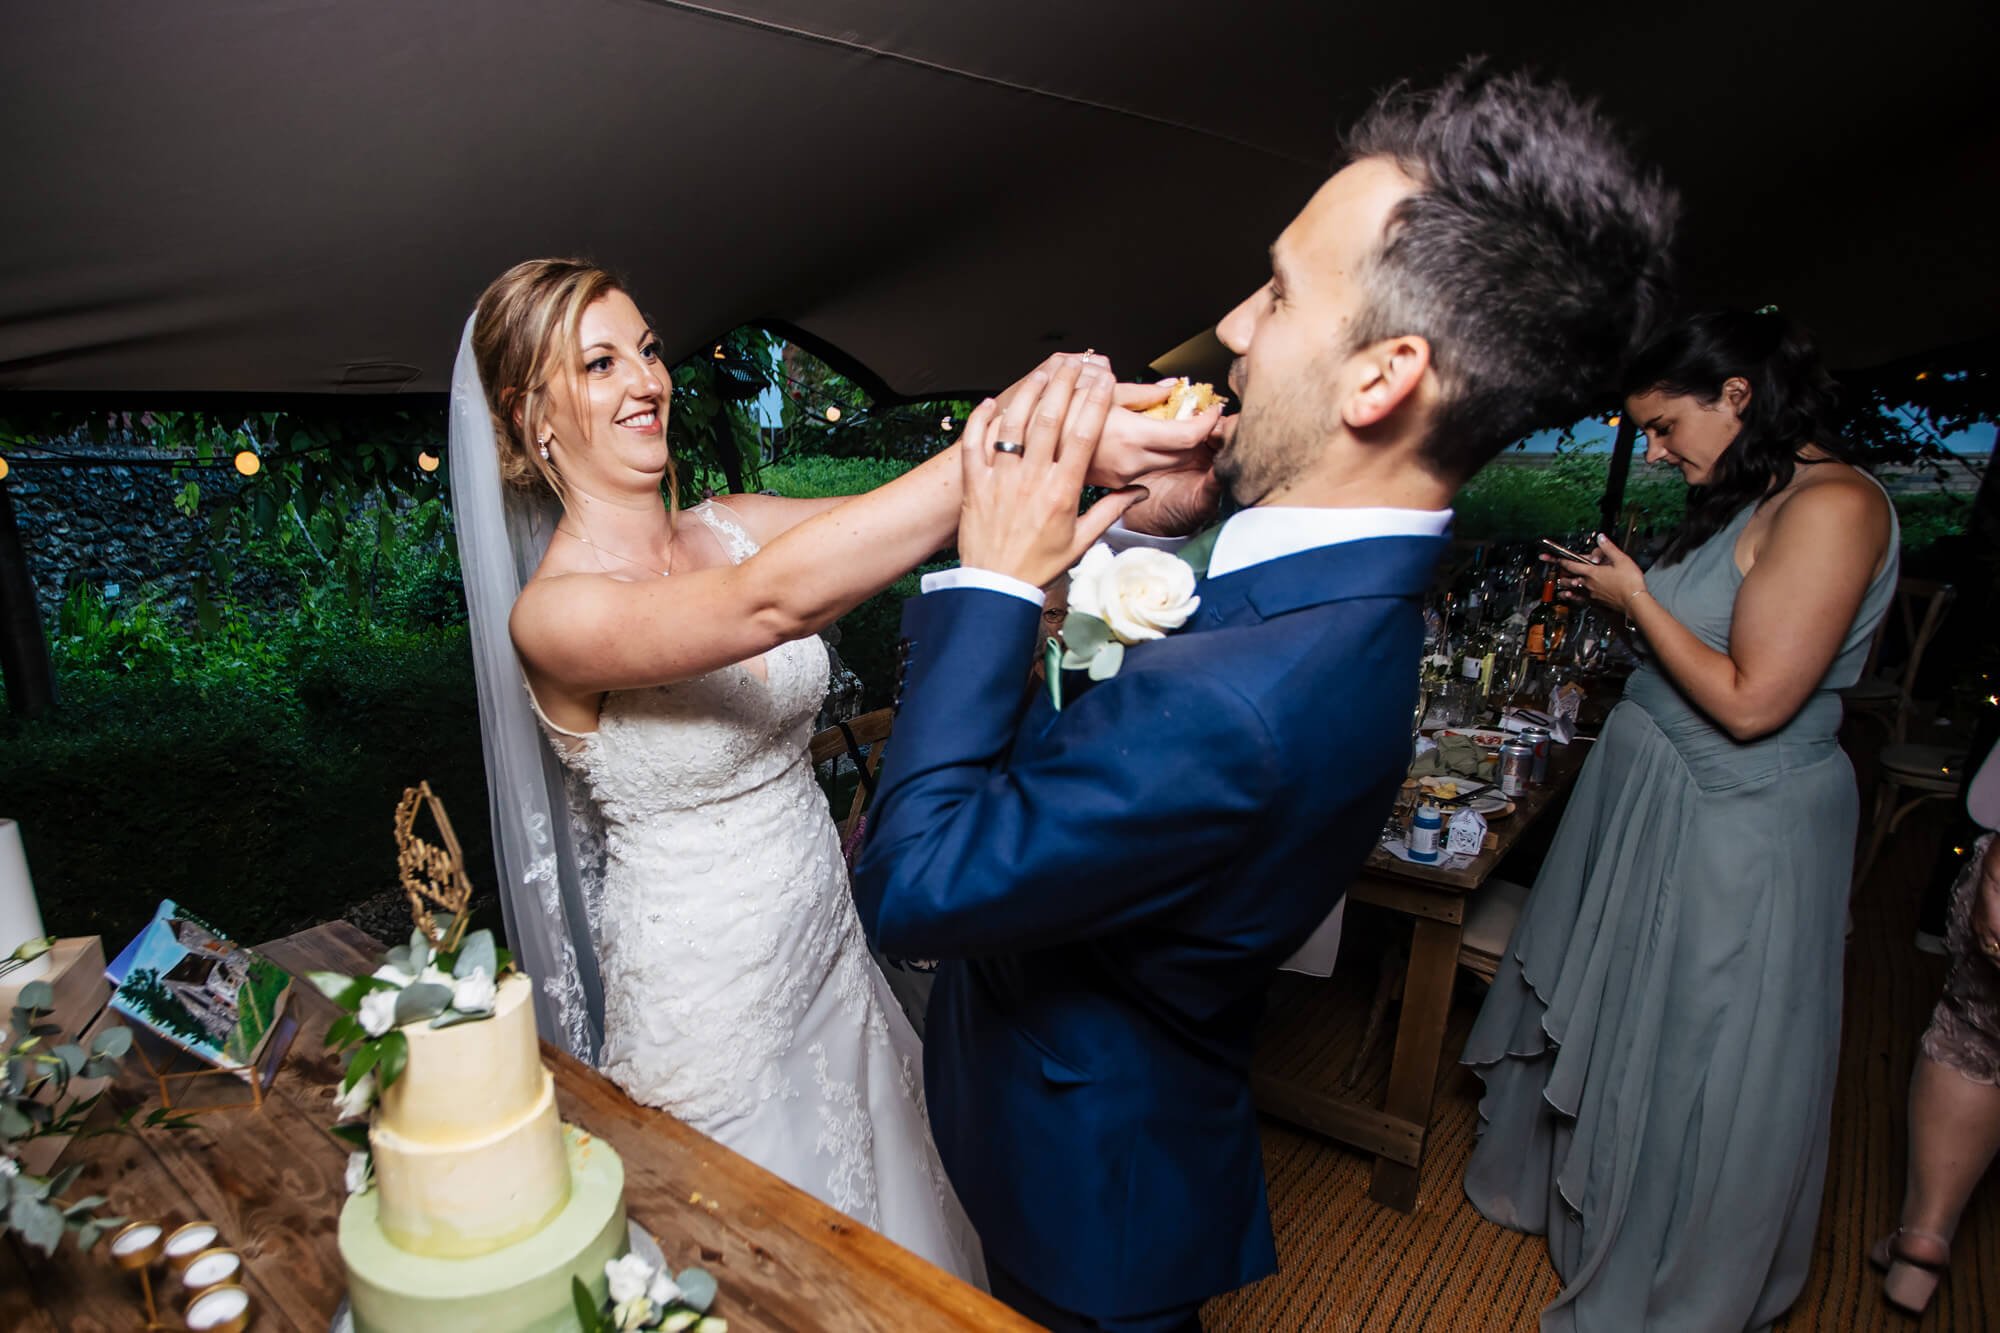 Bride stuffing the cake into the groom's mouth at a wedding